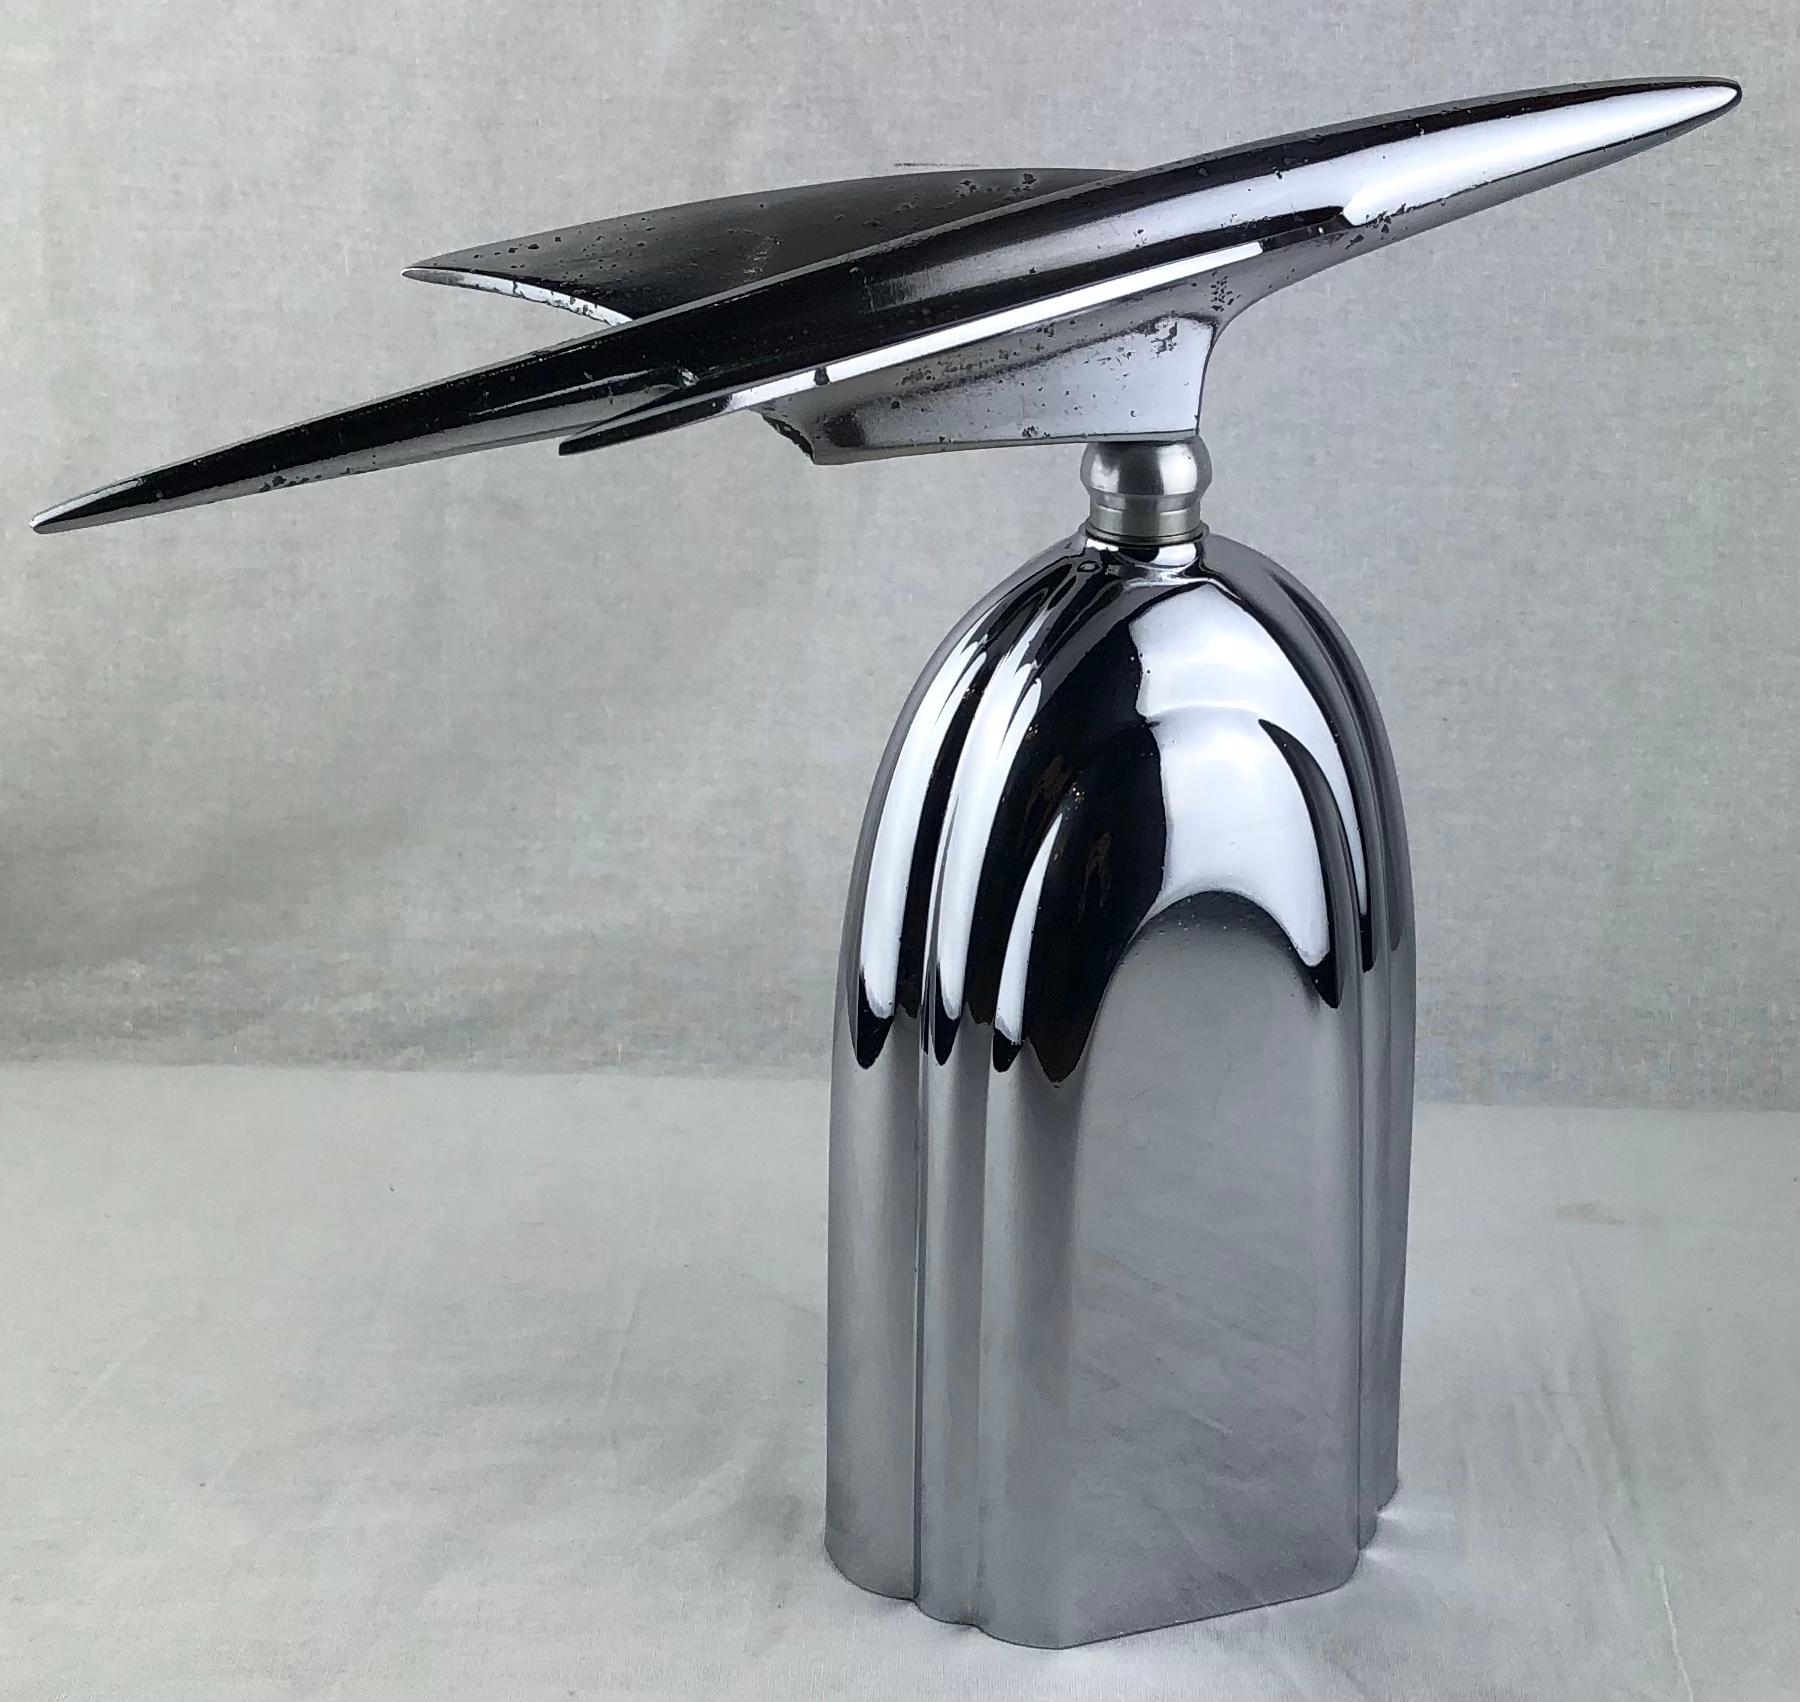 Stunning Art Deco chrome car mascot mounted on a solid chrome base that depicts the Chrysler Building in New York. The base is pure Art Deco style, circa 1930's. 

This makes for a very nice sculpture to display on a shelf, console or desk.
